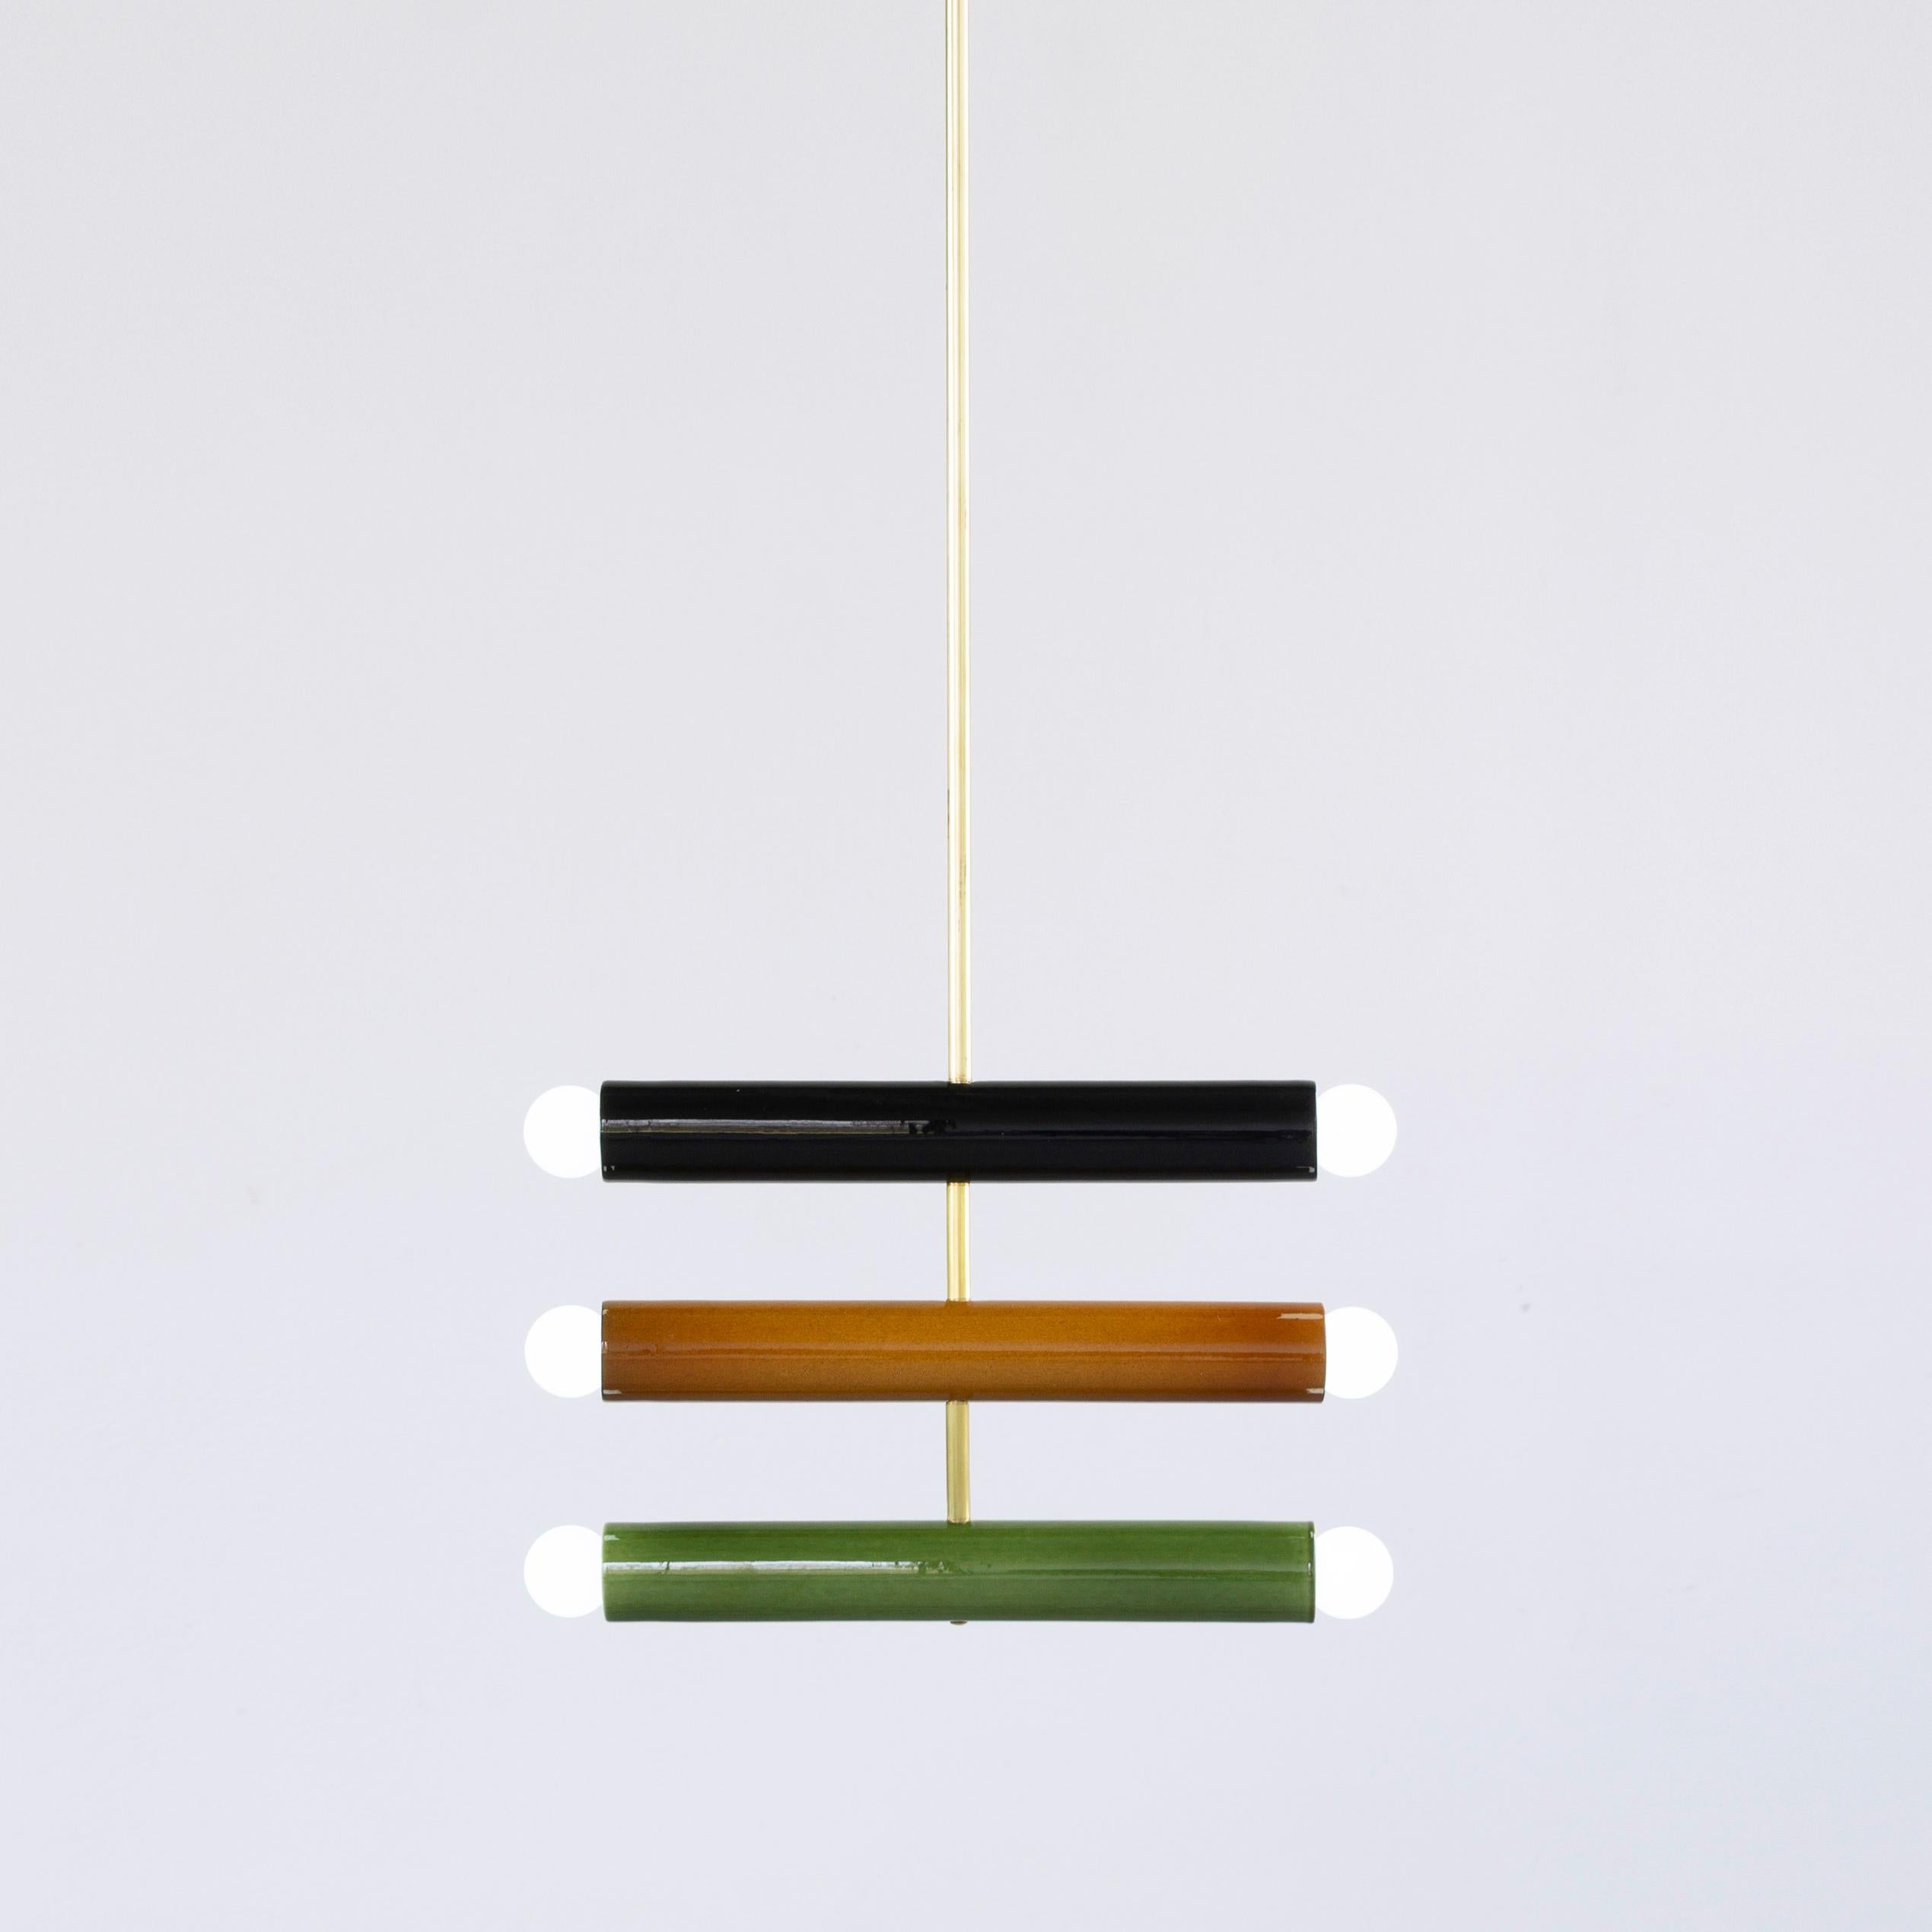 TRN C4 pendant lamp by Pani Jurek
Dimensions: D 5 x W 35 x H 25 cm 
Material: Hand glazed ceramic and brass.
Lamps from the TRN collection hang on a metal tube, not on a cable. This allows the lamp to be mounted in a specific position. The length is